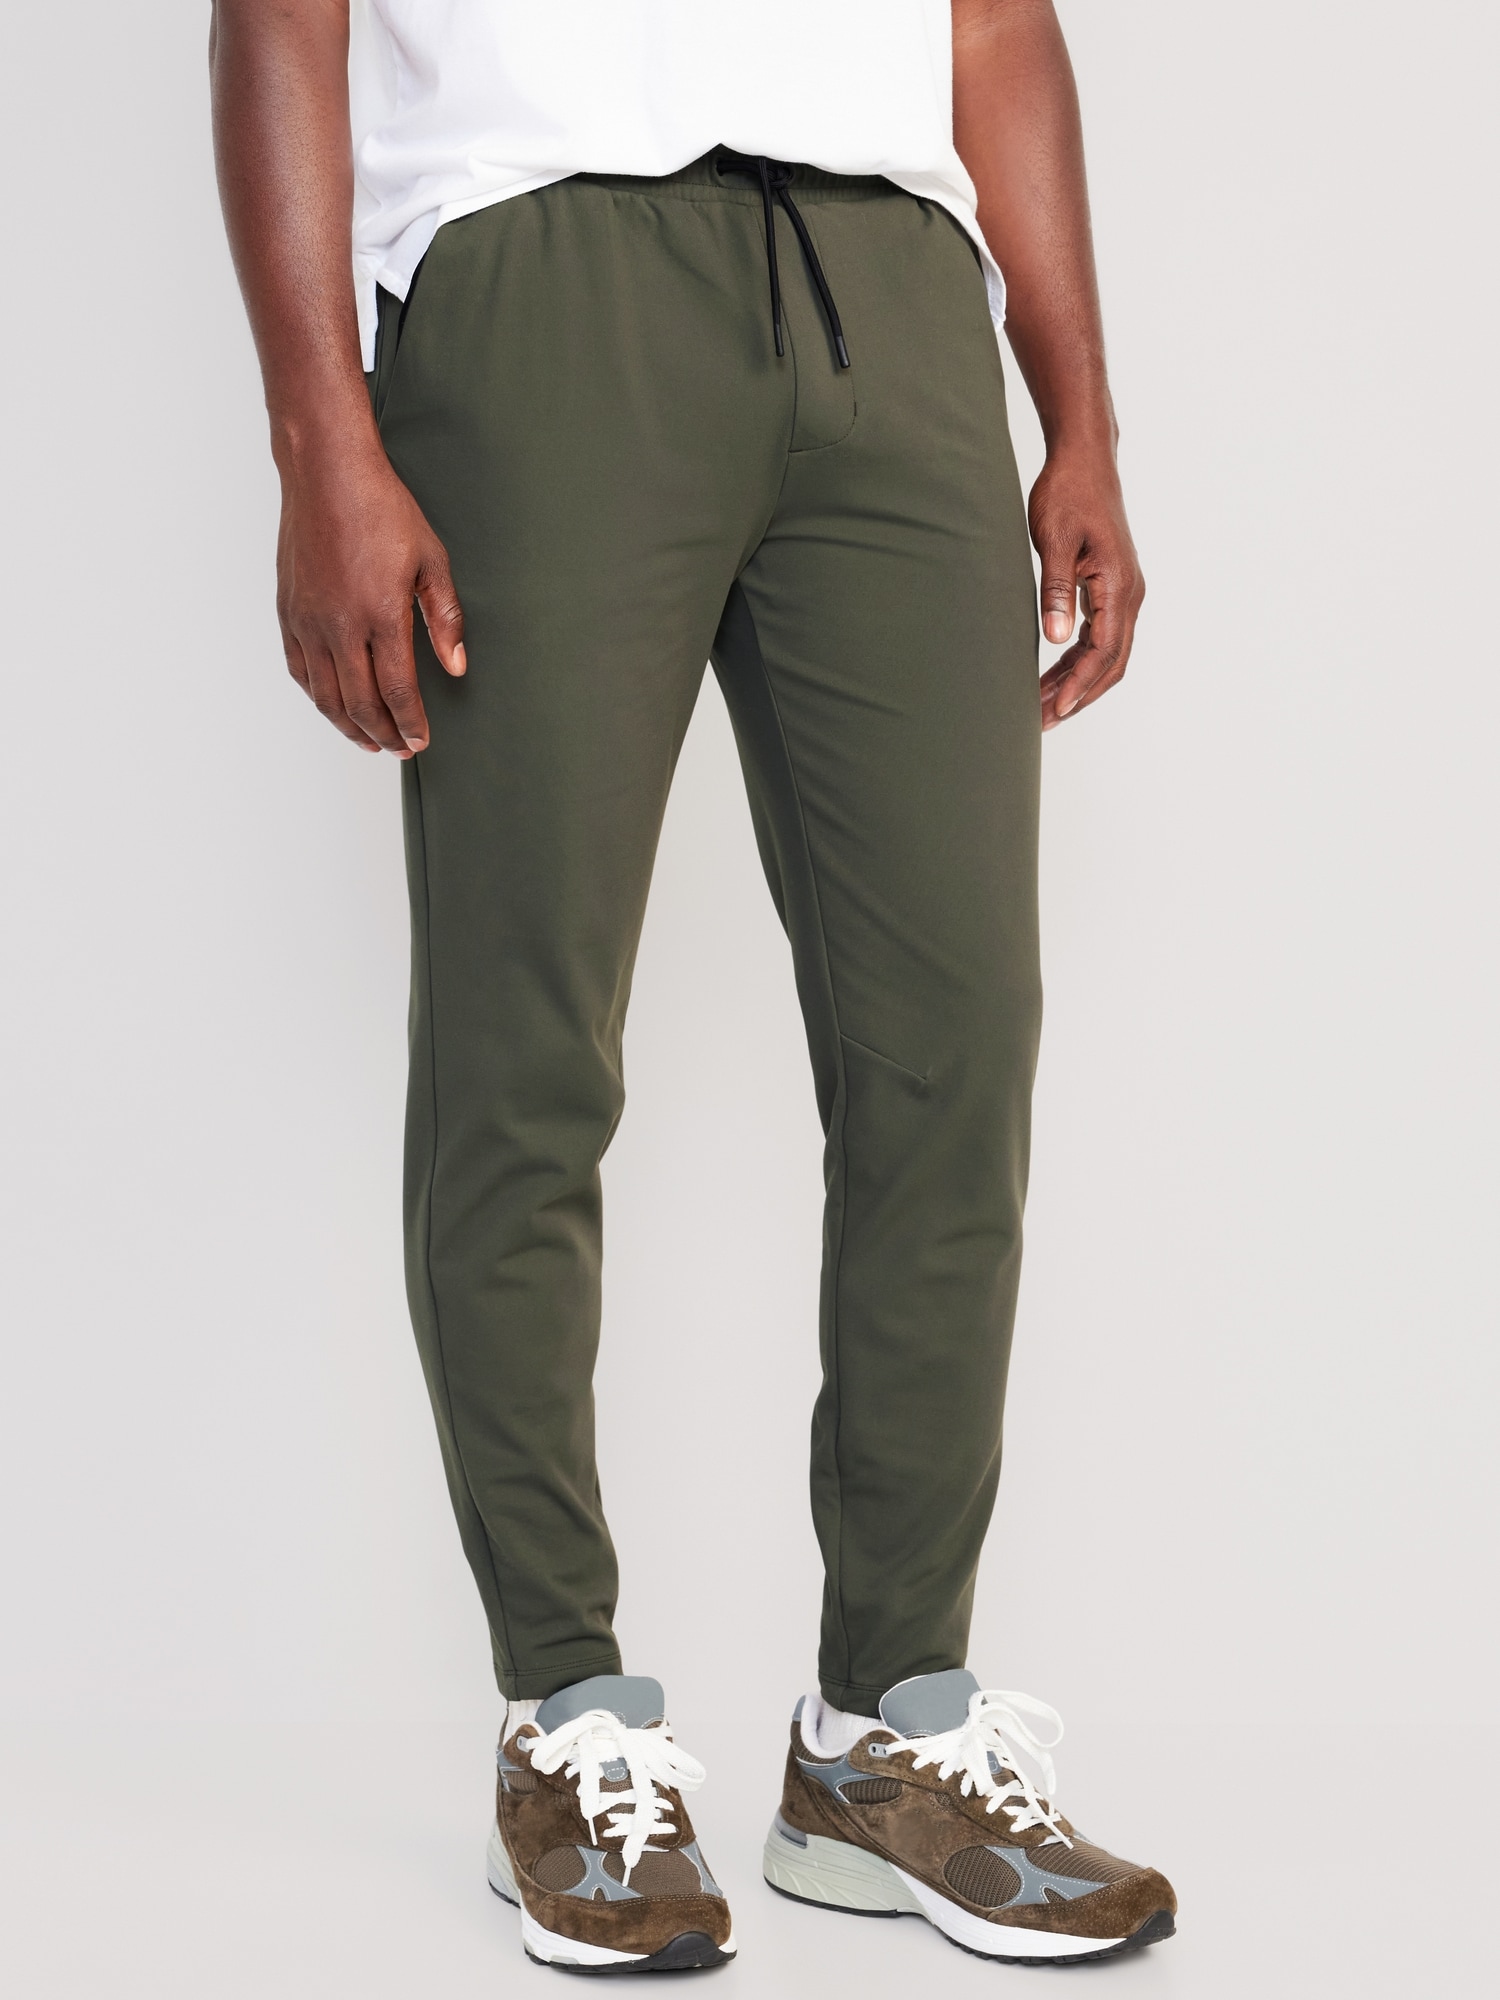 Tapered Go Workout Pants For Men, Old Navy Athletic Pants